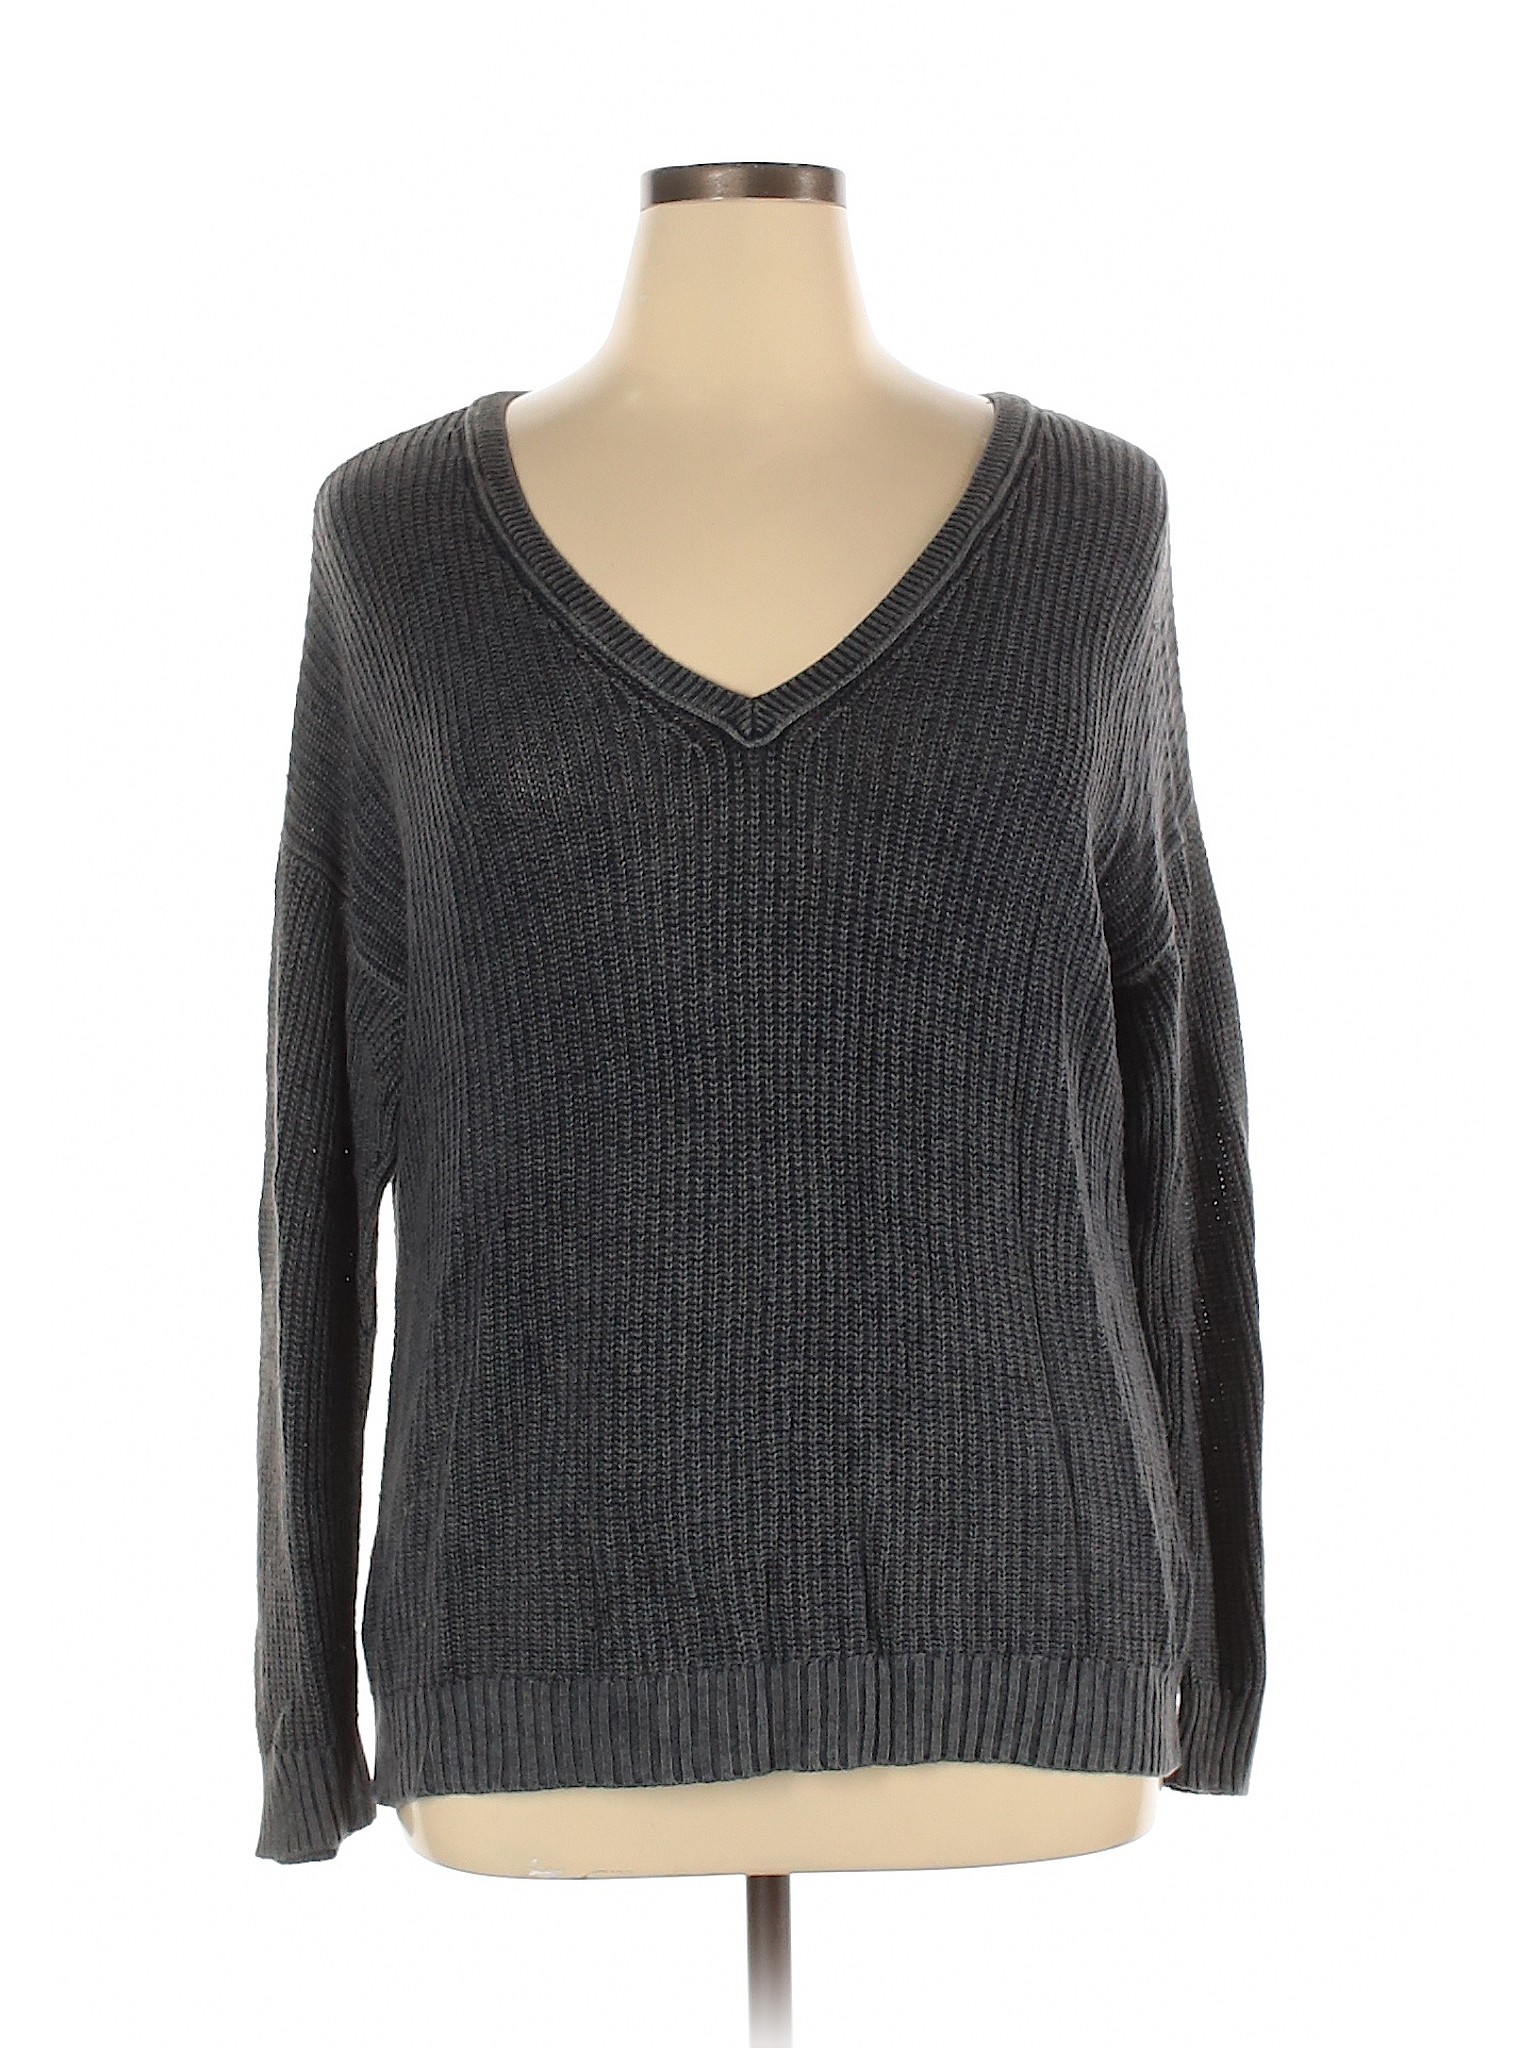 American Eagle Outfitters Women Gray Pullover Sweater XL | eBay